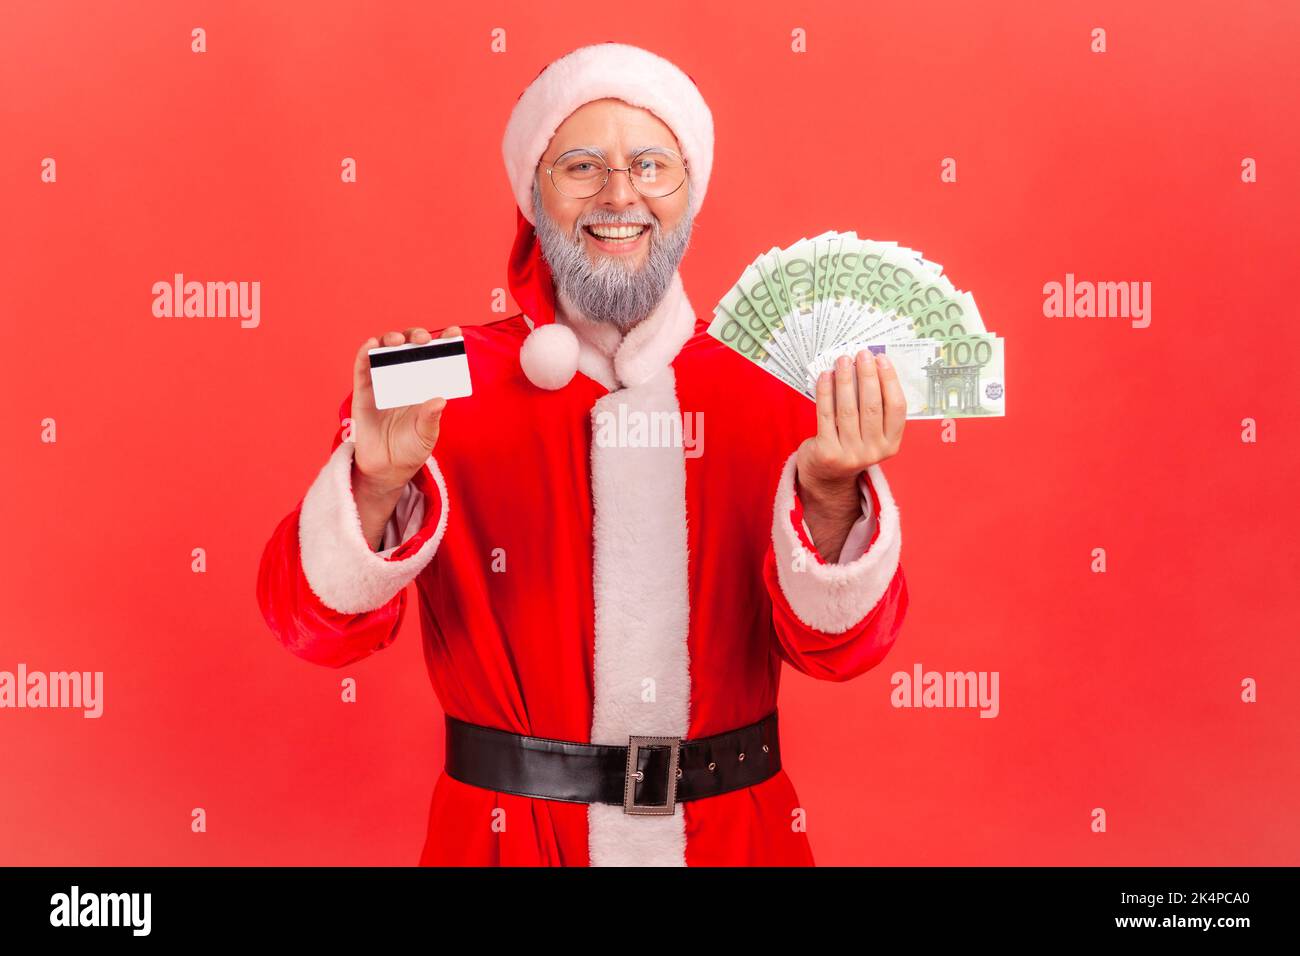 Happy smiling satisfied elderly man with gray beard wearing santa claus costume holding showing fan of euro banknotes and credit card in hands. Indoor studio shot isolated on red background. Stock Photo